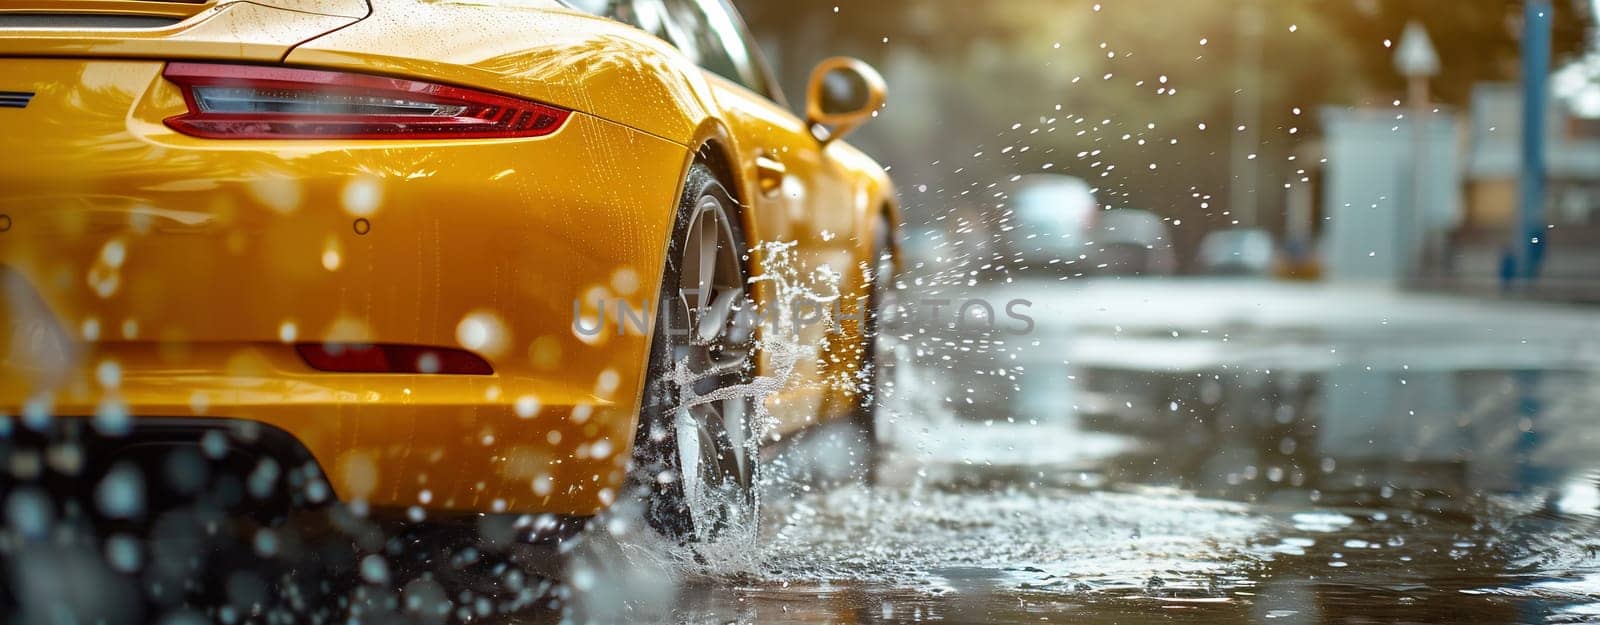 sports yellow car in the rain by Andelov13